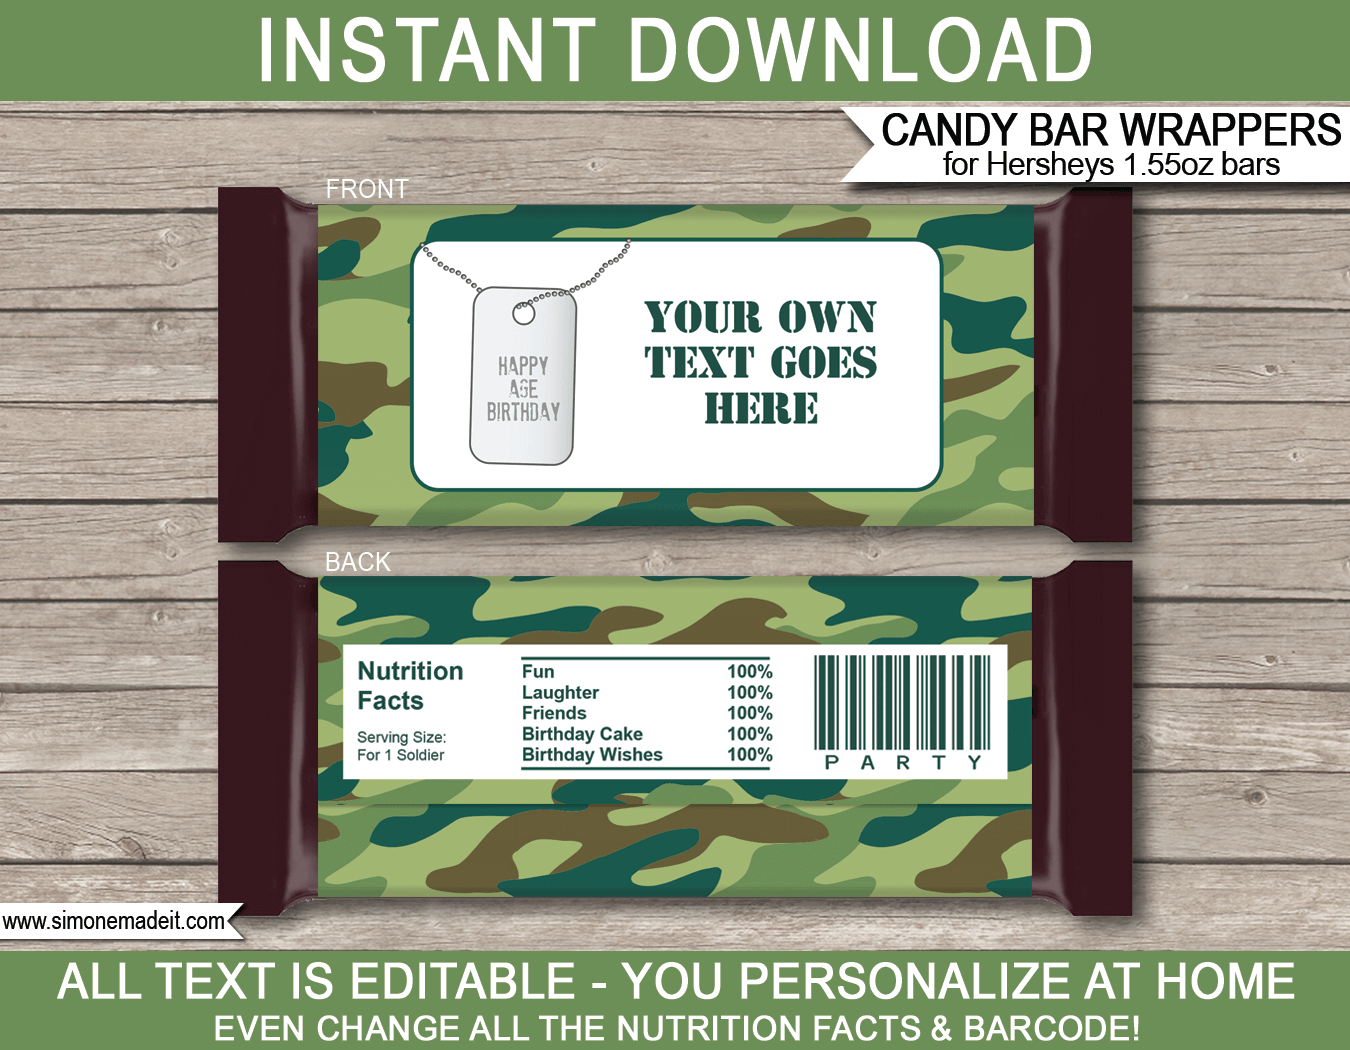 Army Camo Hershey Candy Bar Wrappers | Birthday Party Favors | Personalized Candy Bars | Editable Template | INSTANT DOWNLOAD $3.00 via simonemadeit.com